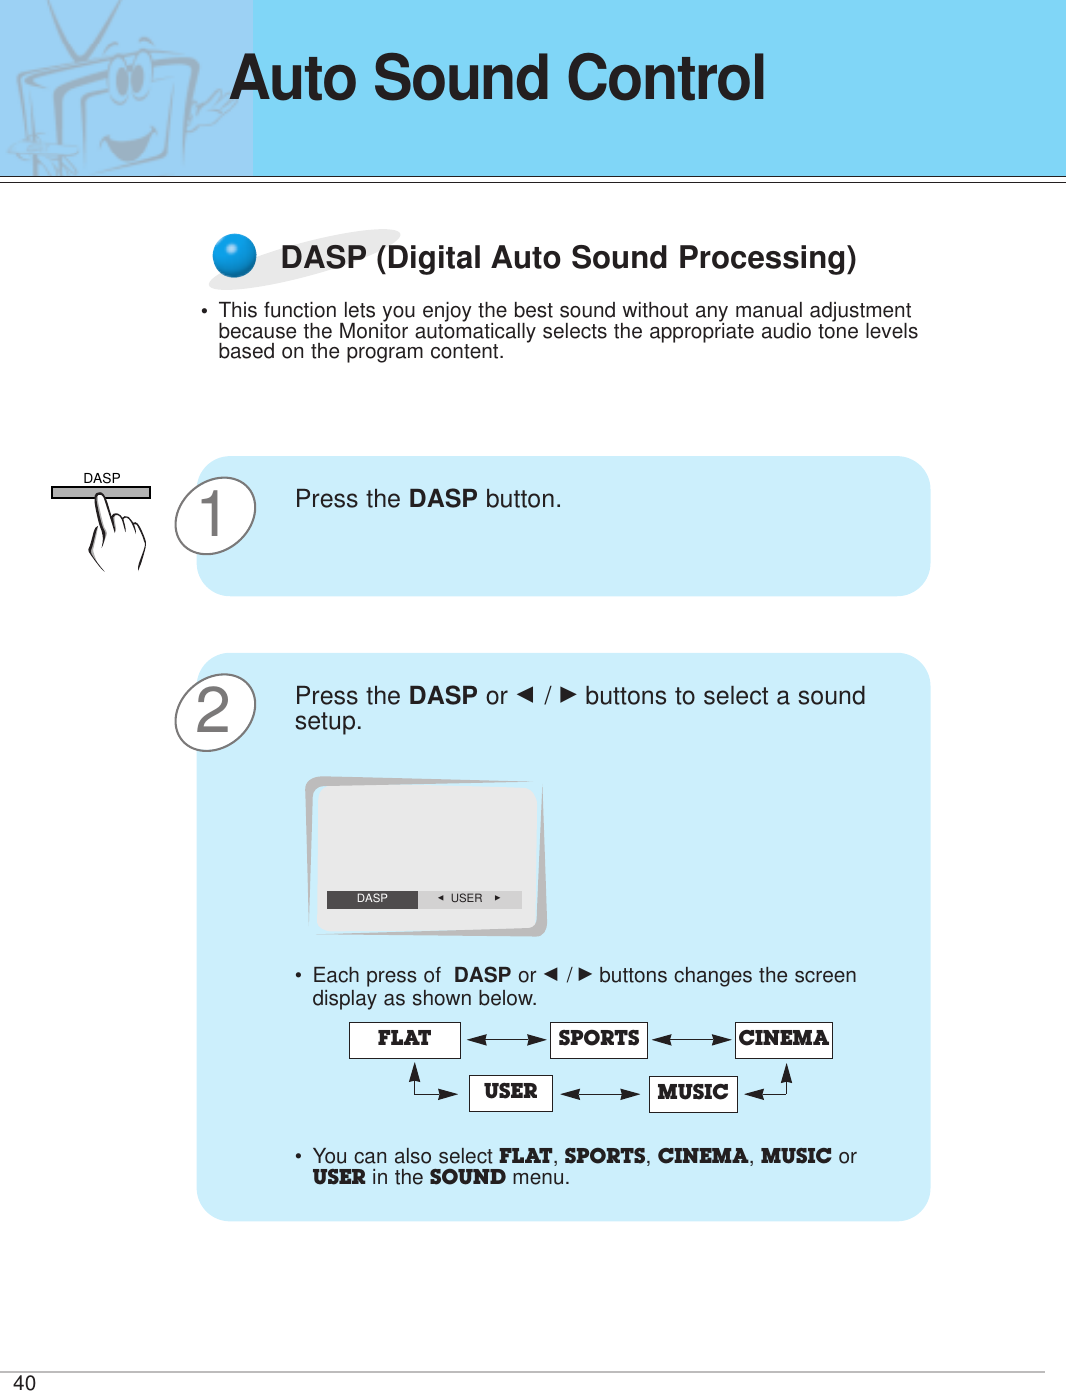 40Auto Sound ControlDASP (Digital Auto Sound Processing)•This function lets you enjoy the best sound without any manual adjustmentbecause the Monitor automatically selects the appropriate audio tone levelsbased on the program content.1Press the DASP button. 2Press the DASP or F / Gbuttons to select a soundsetup.•Each press of  DASP or F /Gbuttons changes the screendisplay as shown below.• You can also select FLAT, SPORTS, CINEMA, MUSIC orUSER in the SOUND menu. FLAT SPORTSUSERCINEMAMUSICF  USER GDASPDASP